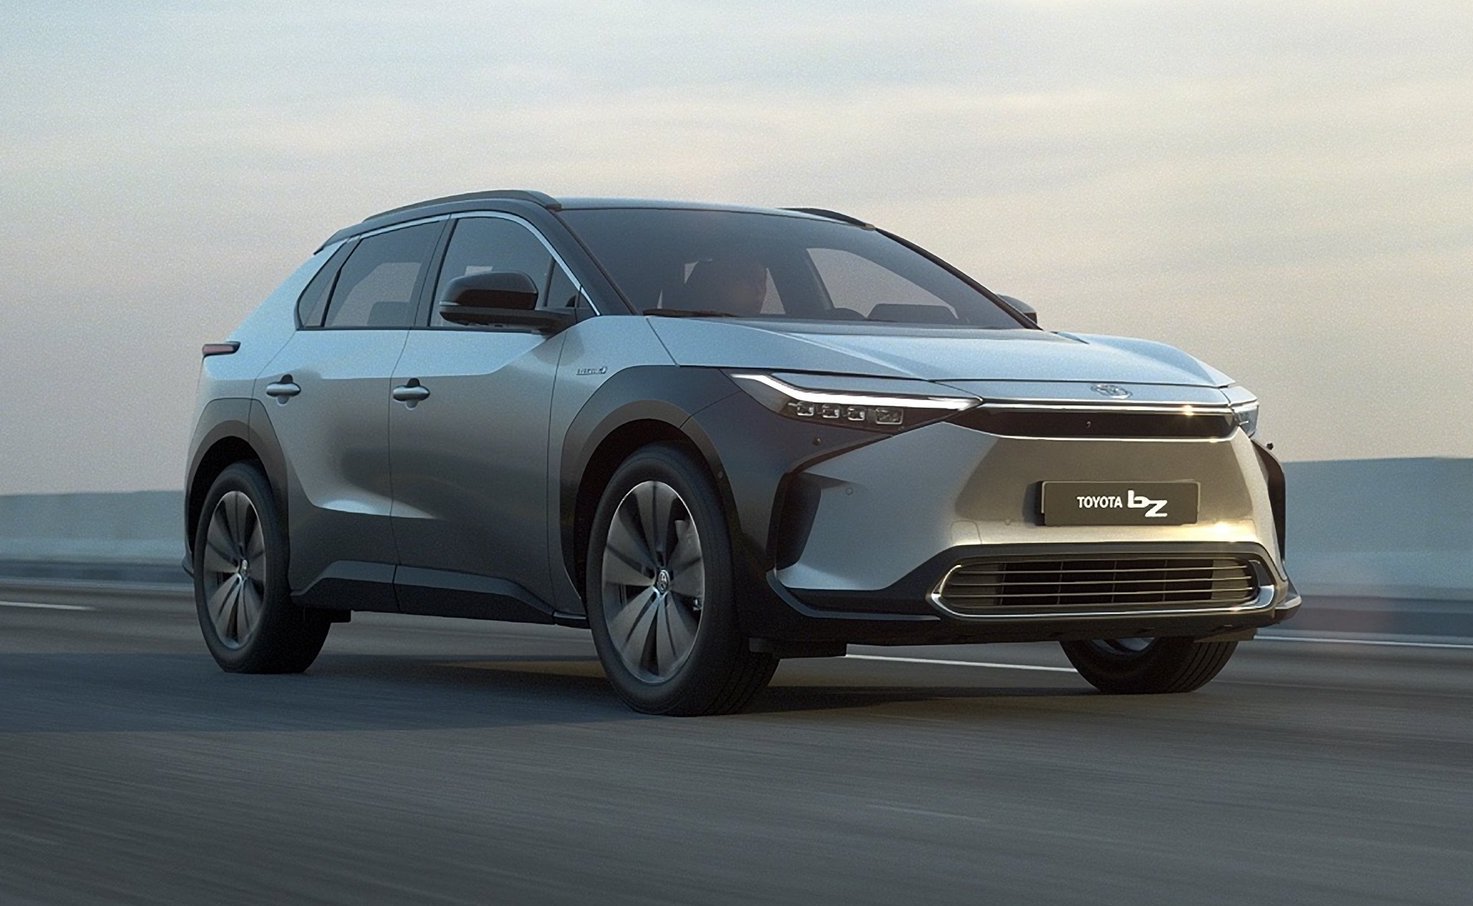 Toyota reveals details of bZ4x electric SUV, arrives in 2022